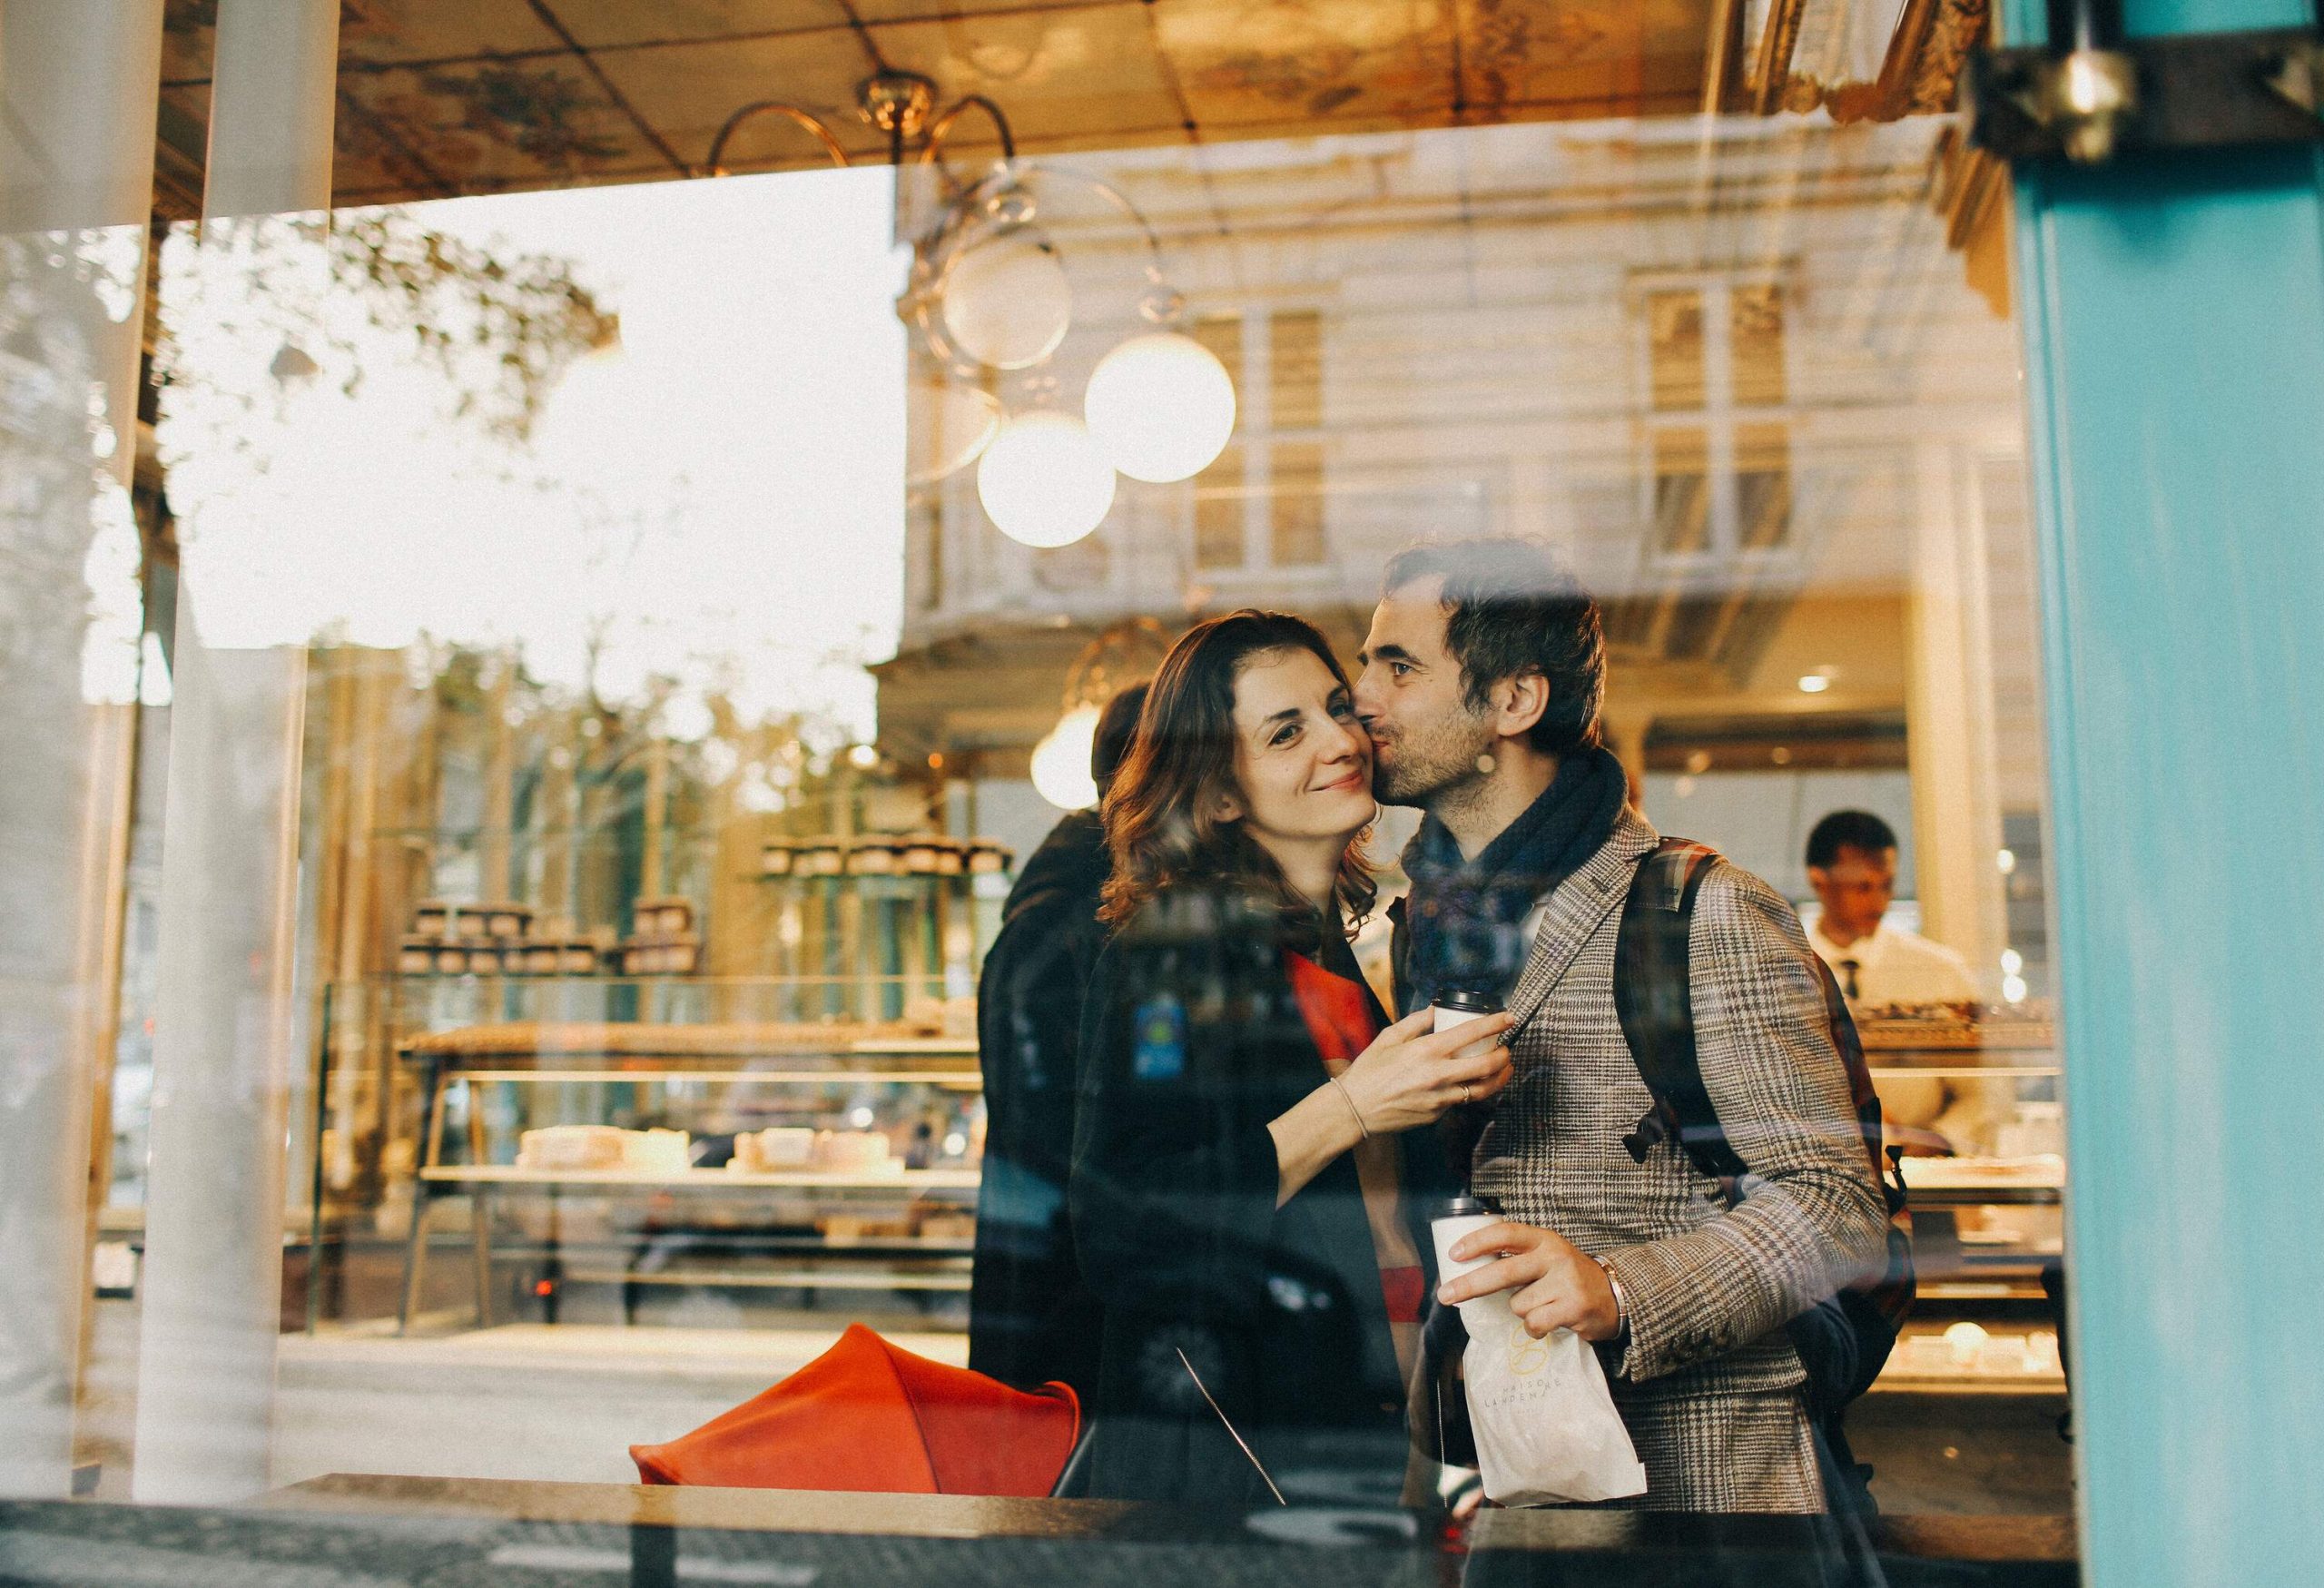 Someone kissing another person's cheek behind a glass partition in a cafe.